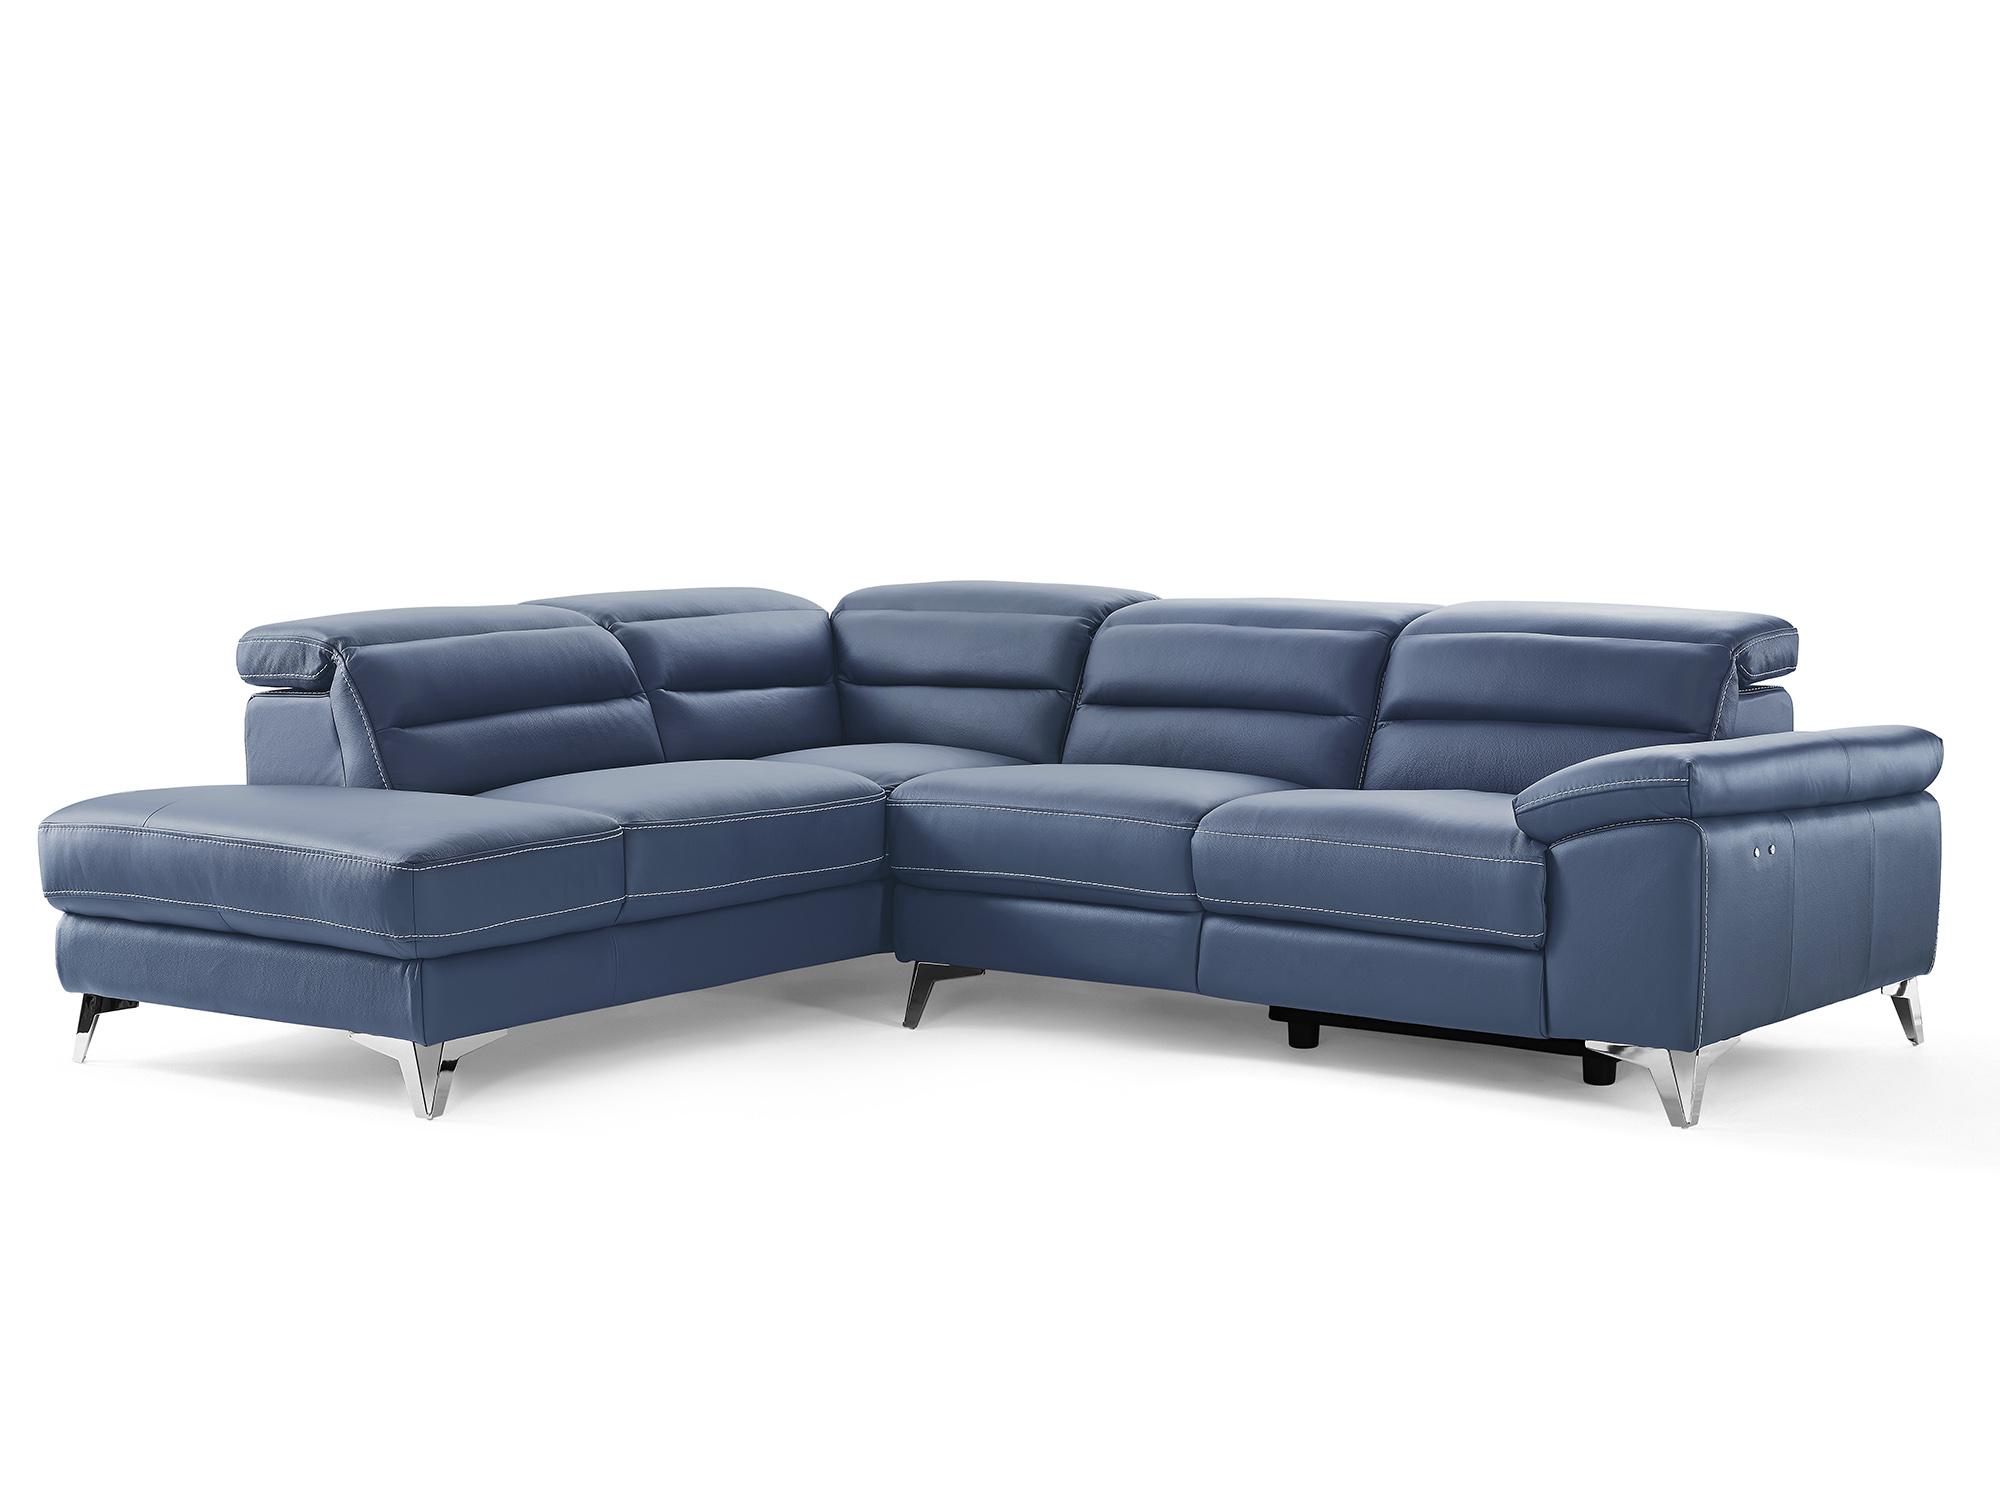 Modern Sectional SL1349L-NVY Johnson SL1349L-NVY in Navy blue Top grain leather